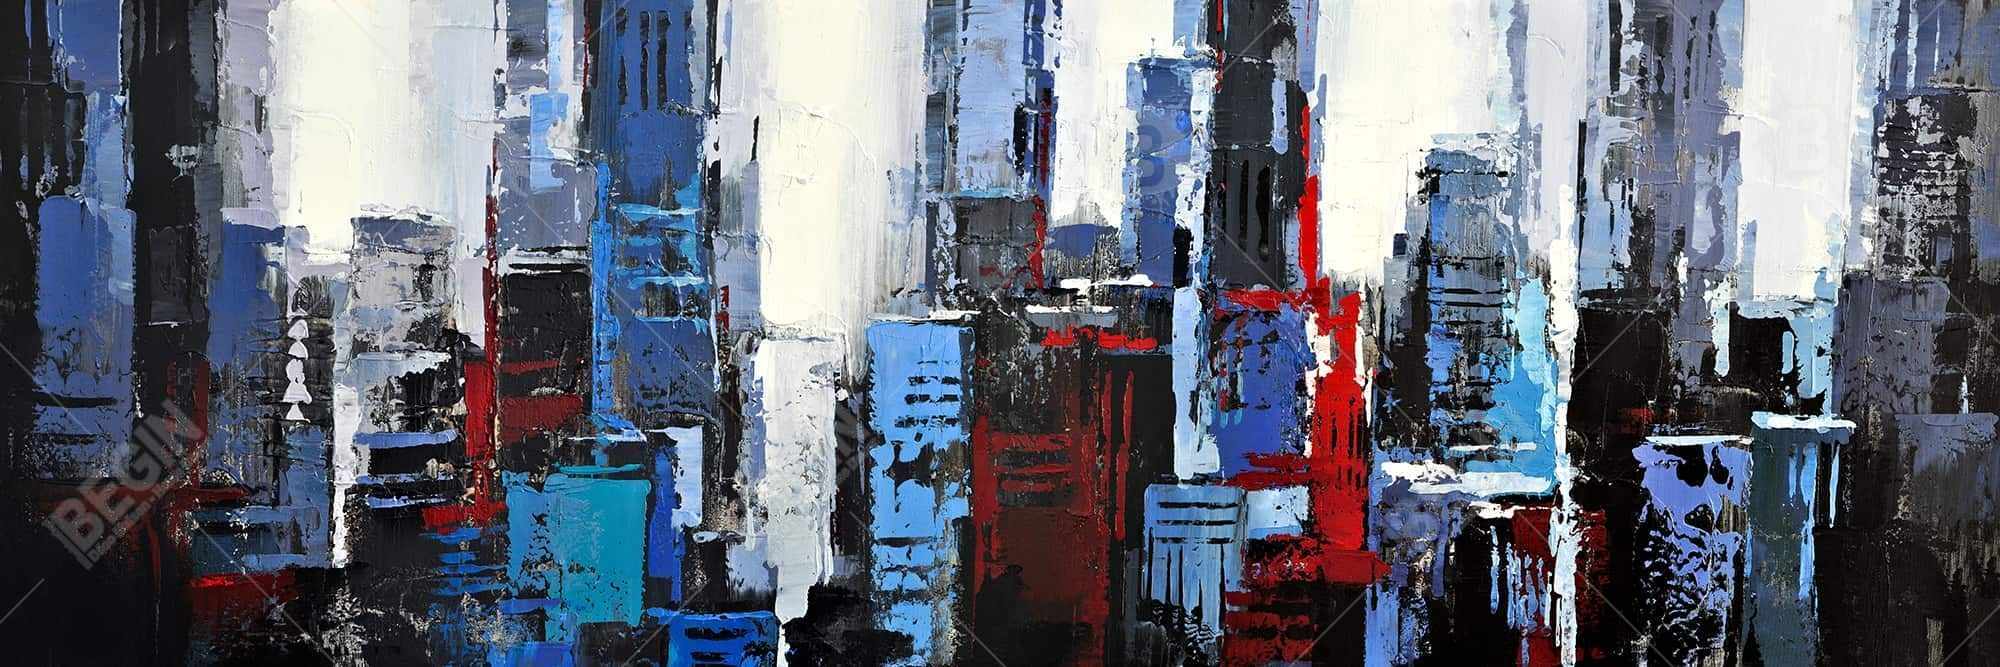 Abstract blue city